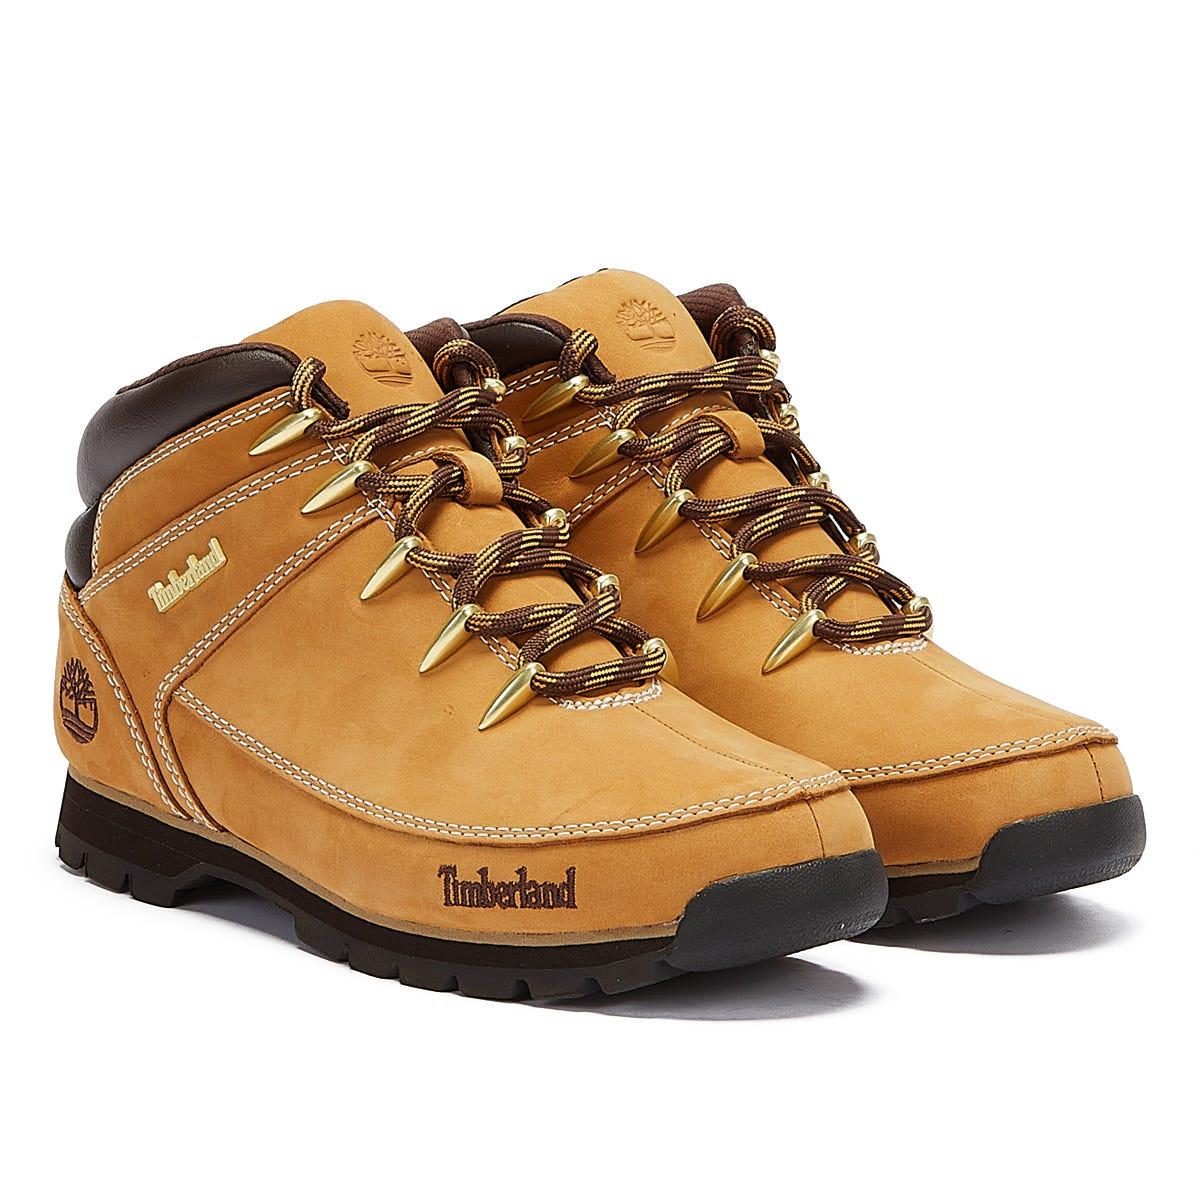 Buy > timberland mens hiker boots > in stock